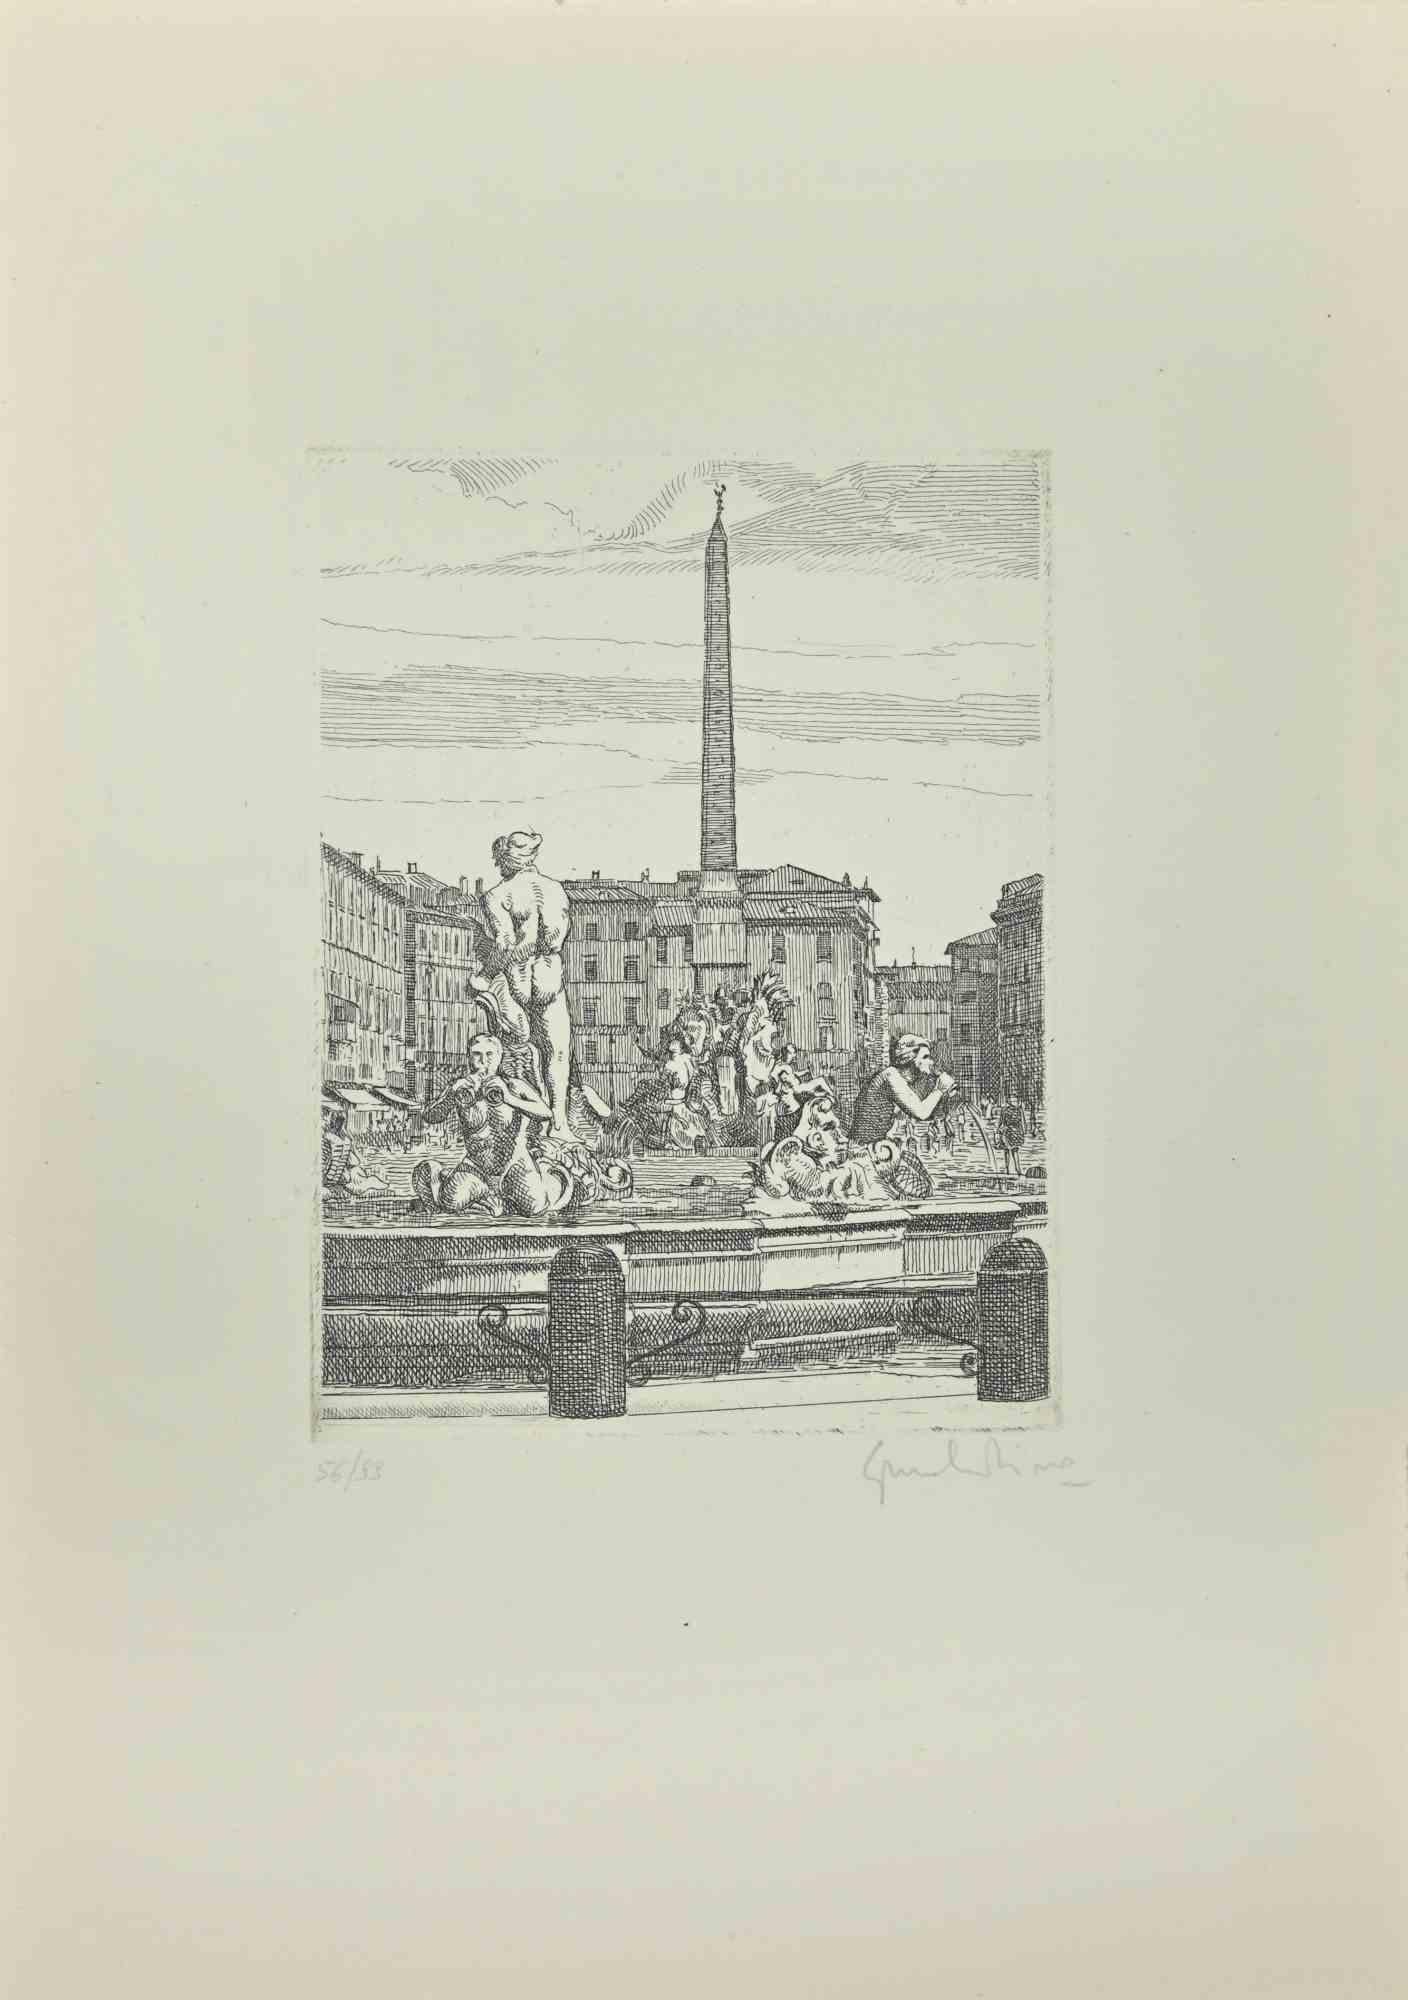 Roman View is an artwork realized by Giuseppe Malandrino.

Print in etching technique

Hand-signed by the artist in pencil on the lower right corner.

Numbered edition,56/99.

Good condition.

This artwork represents the beautiful Roman landscape